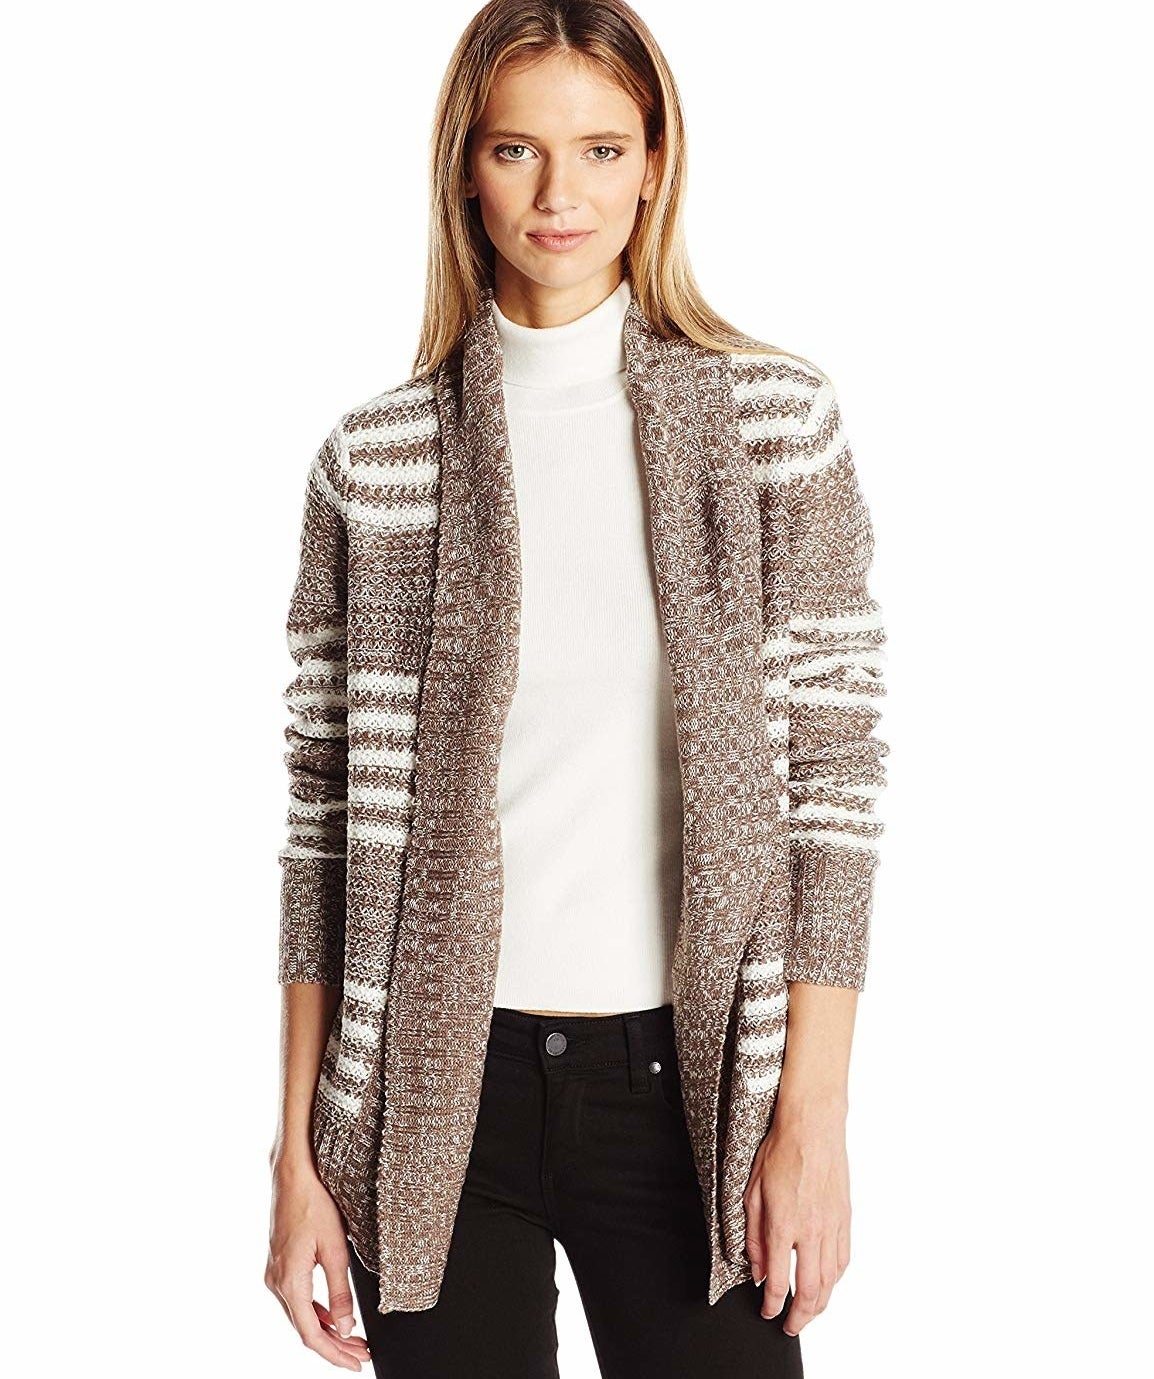 18 Of The Best Cardigans You Can Get On Amazon